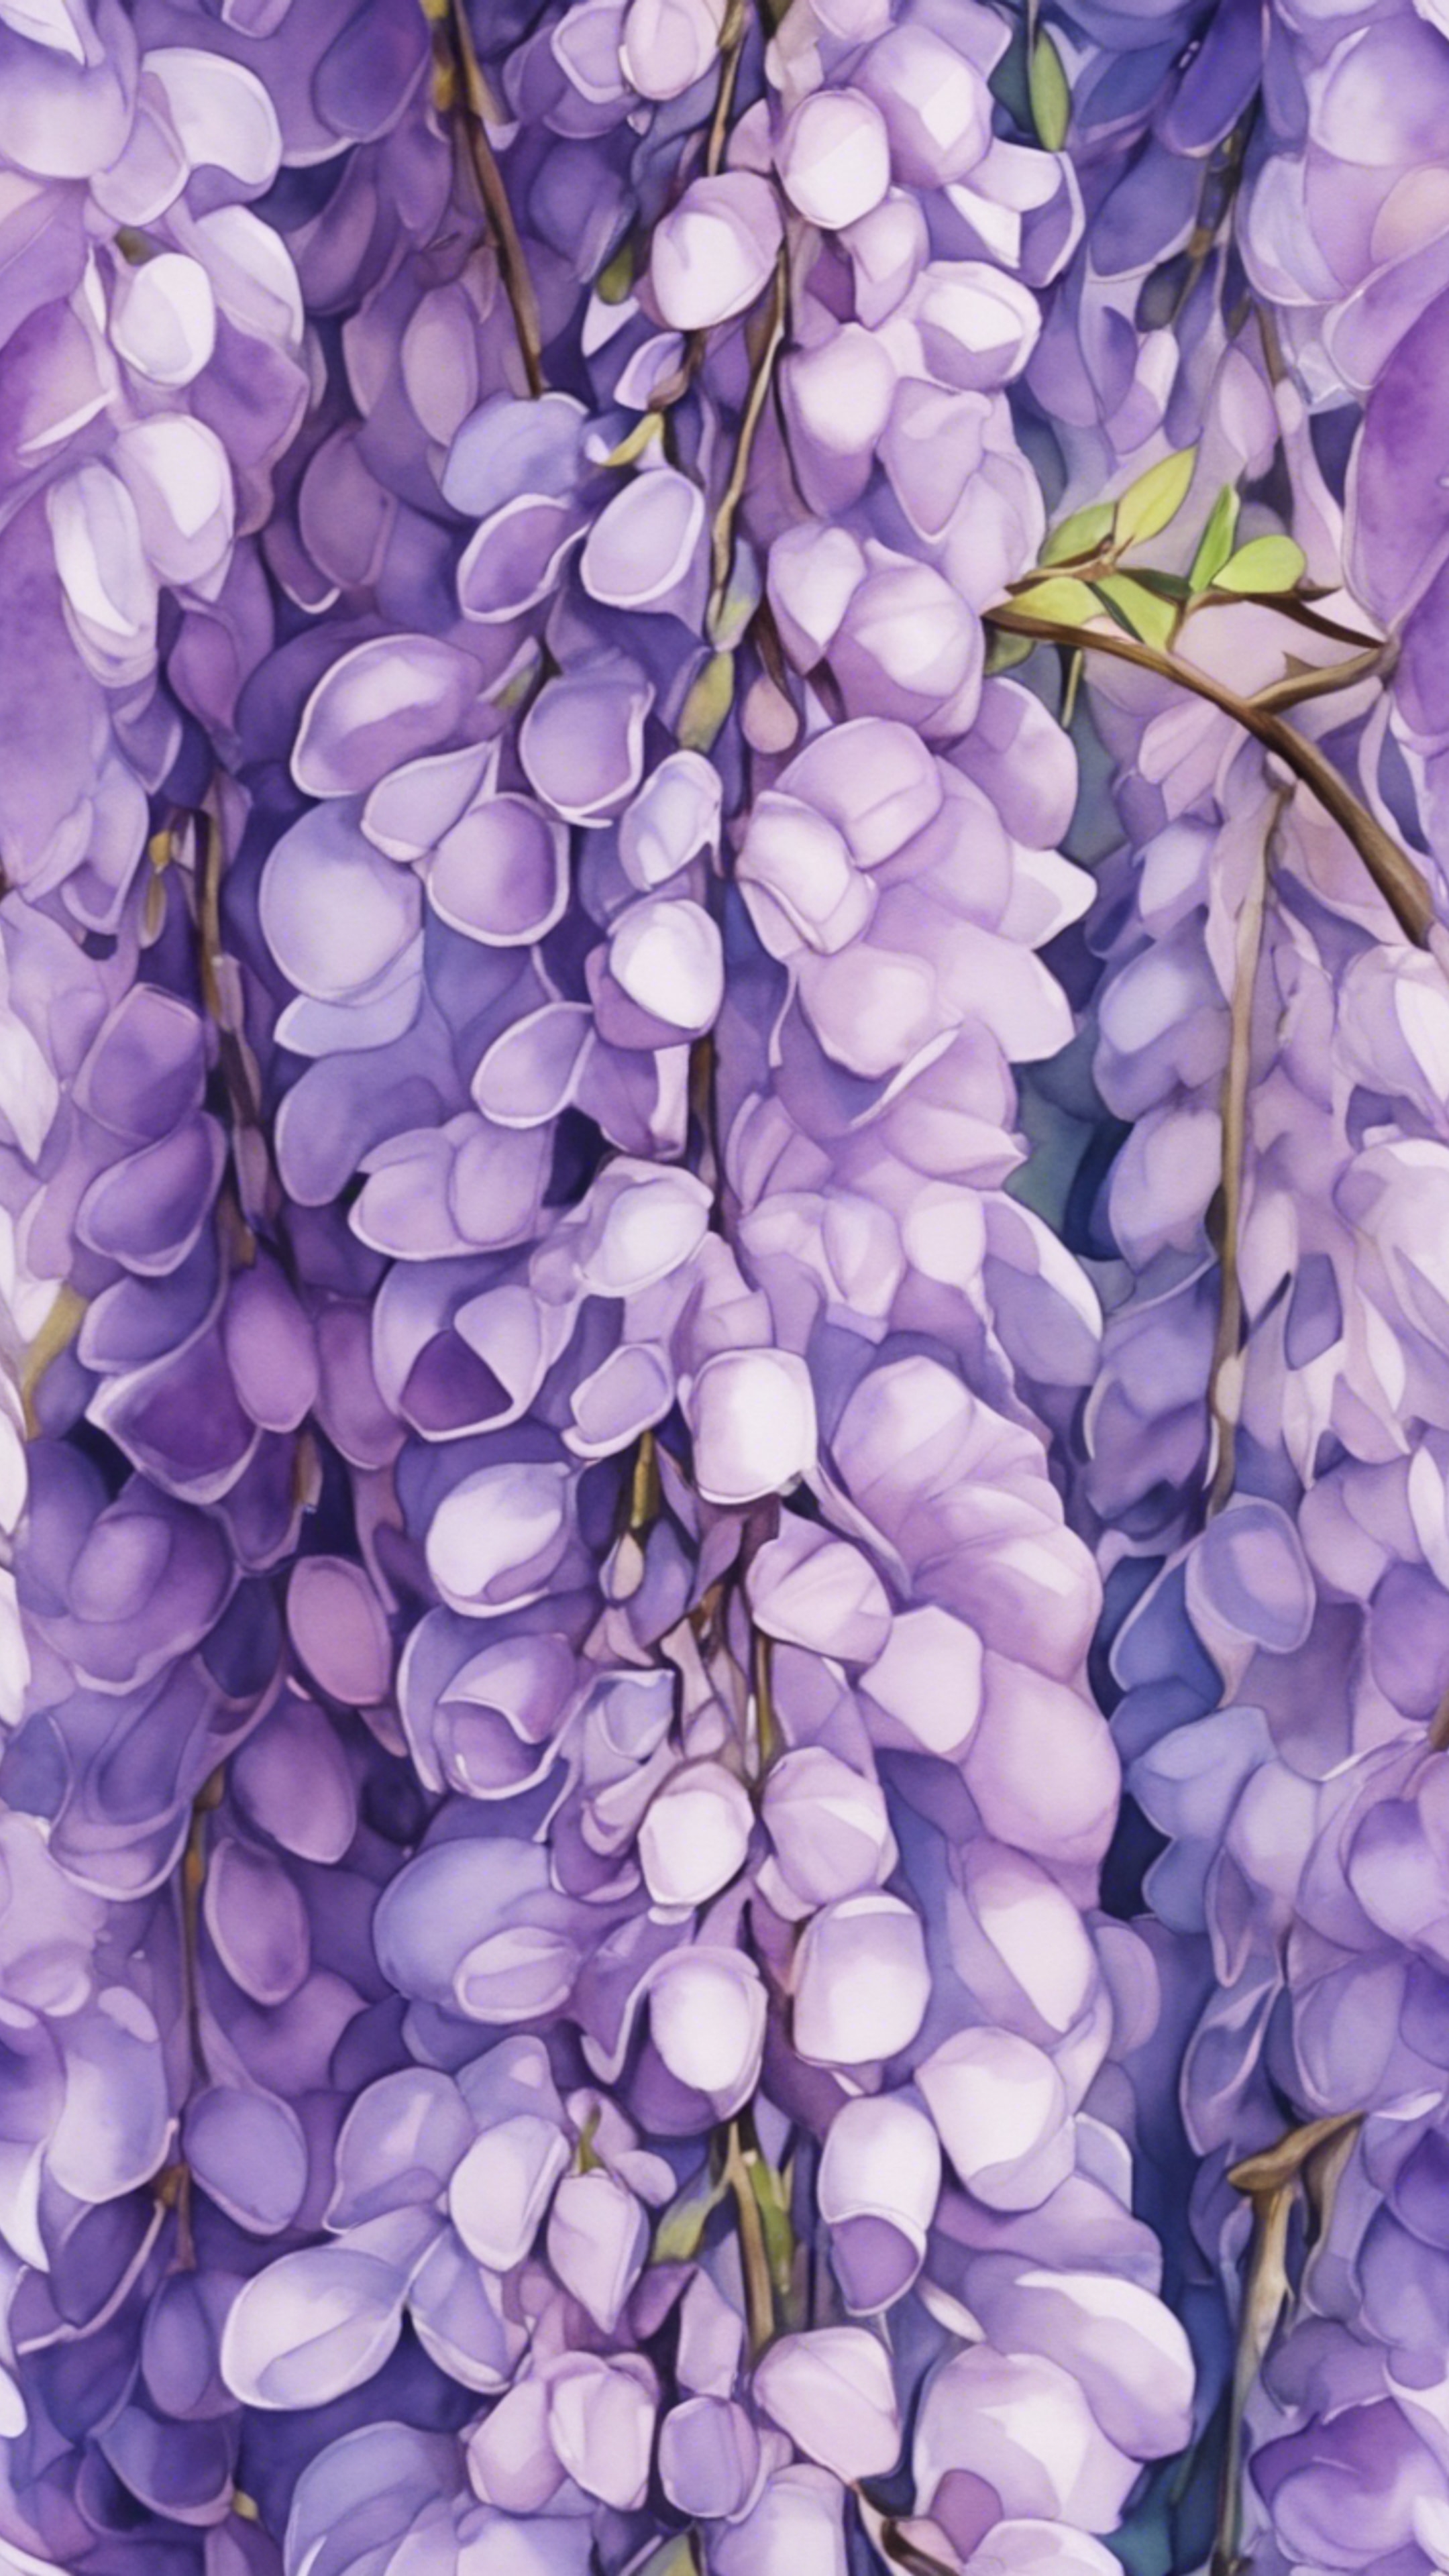 Abstract watercolor pattern of soft violet wisteria blossoms壁紙[25f0d0e3fc1c4b318171]